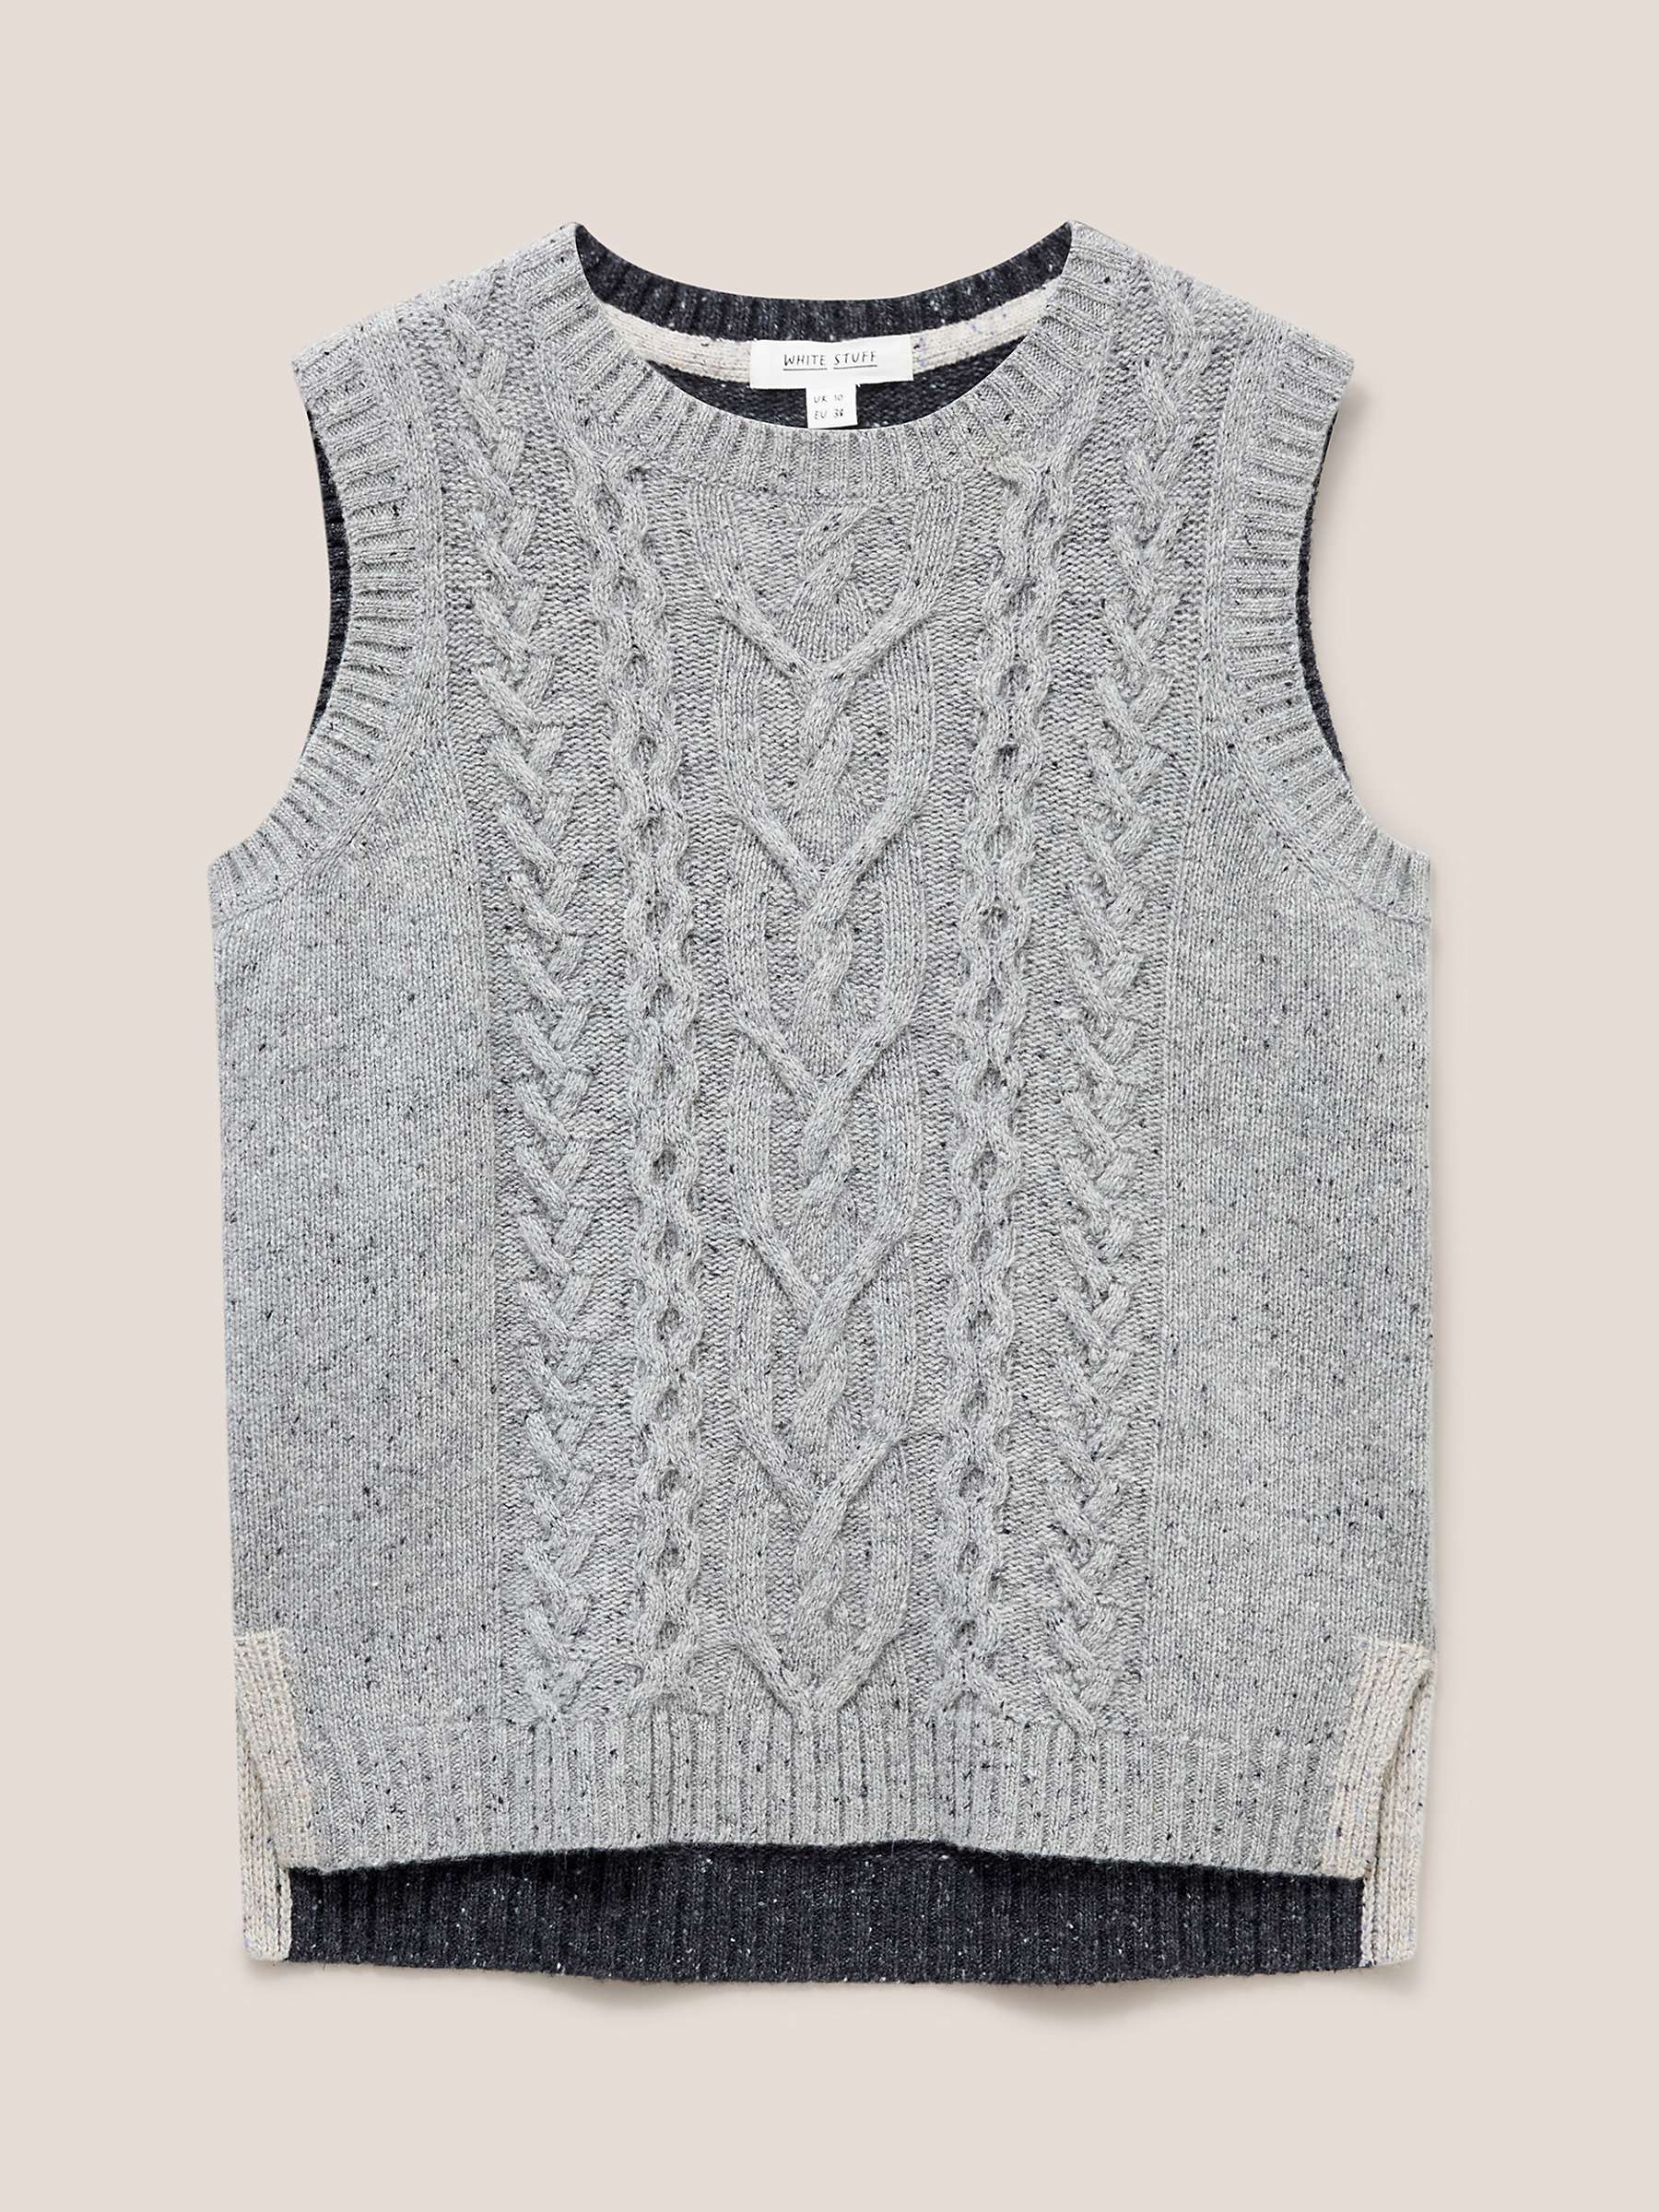 Buy White Stuff Cable Knit Wool Blend Tank Top, Grey/Multi Online at johnlewis.com